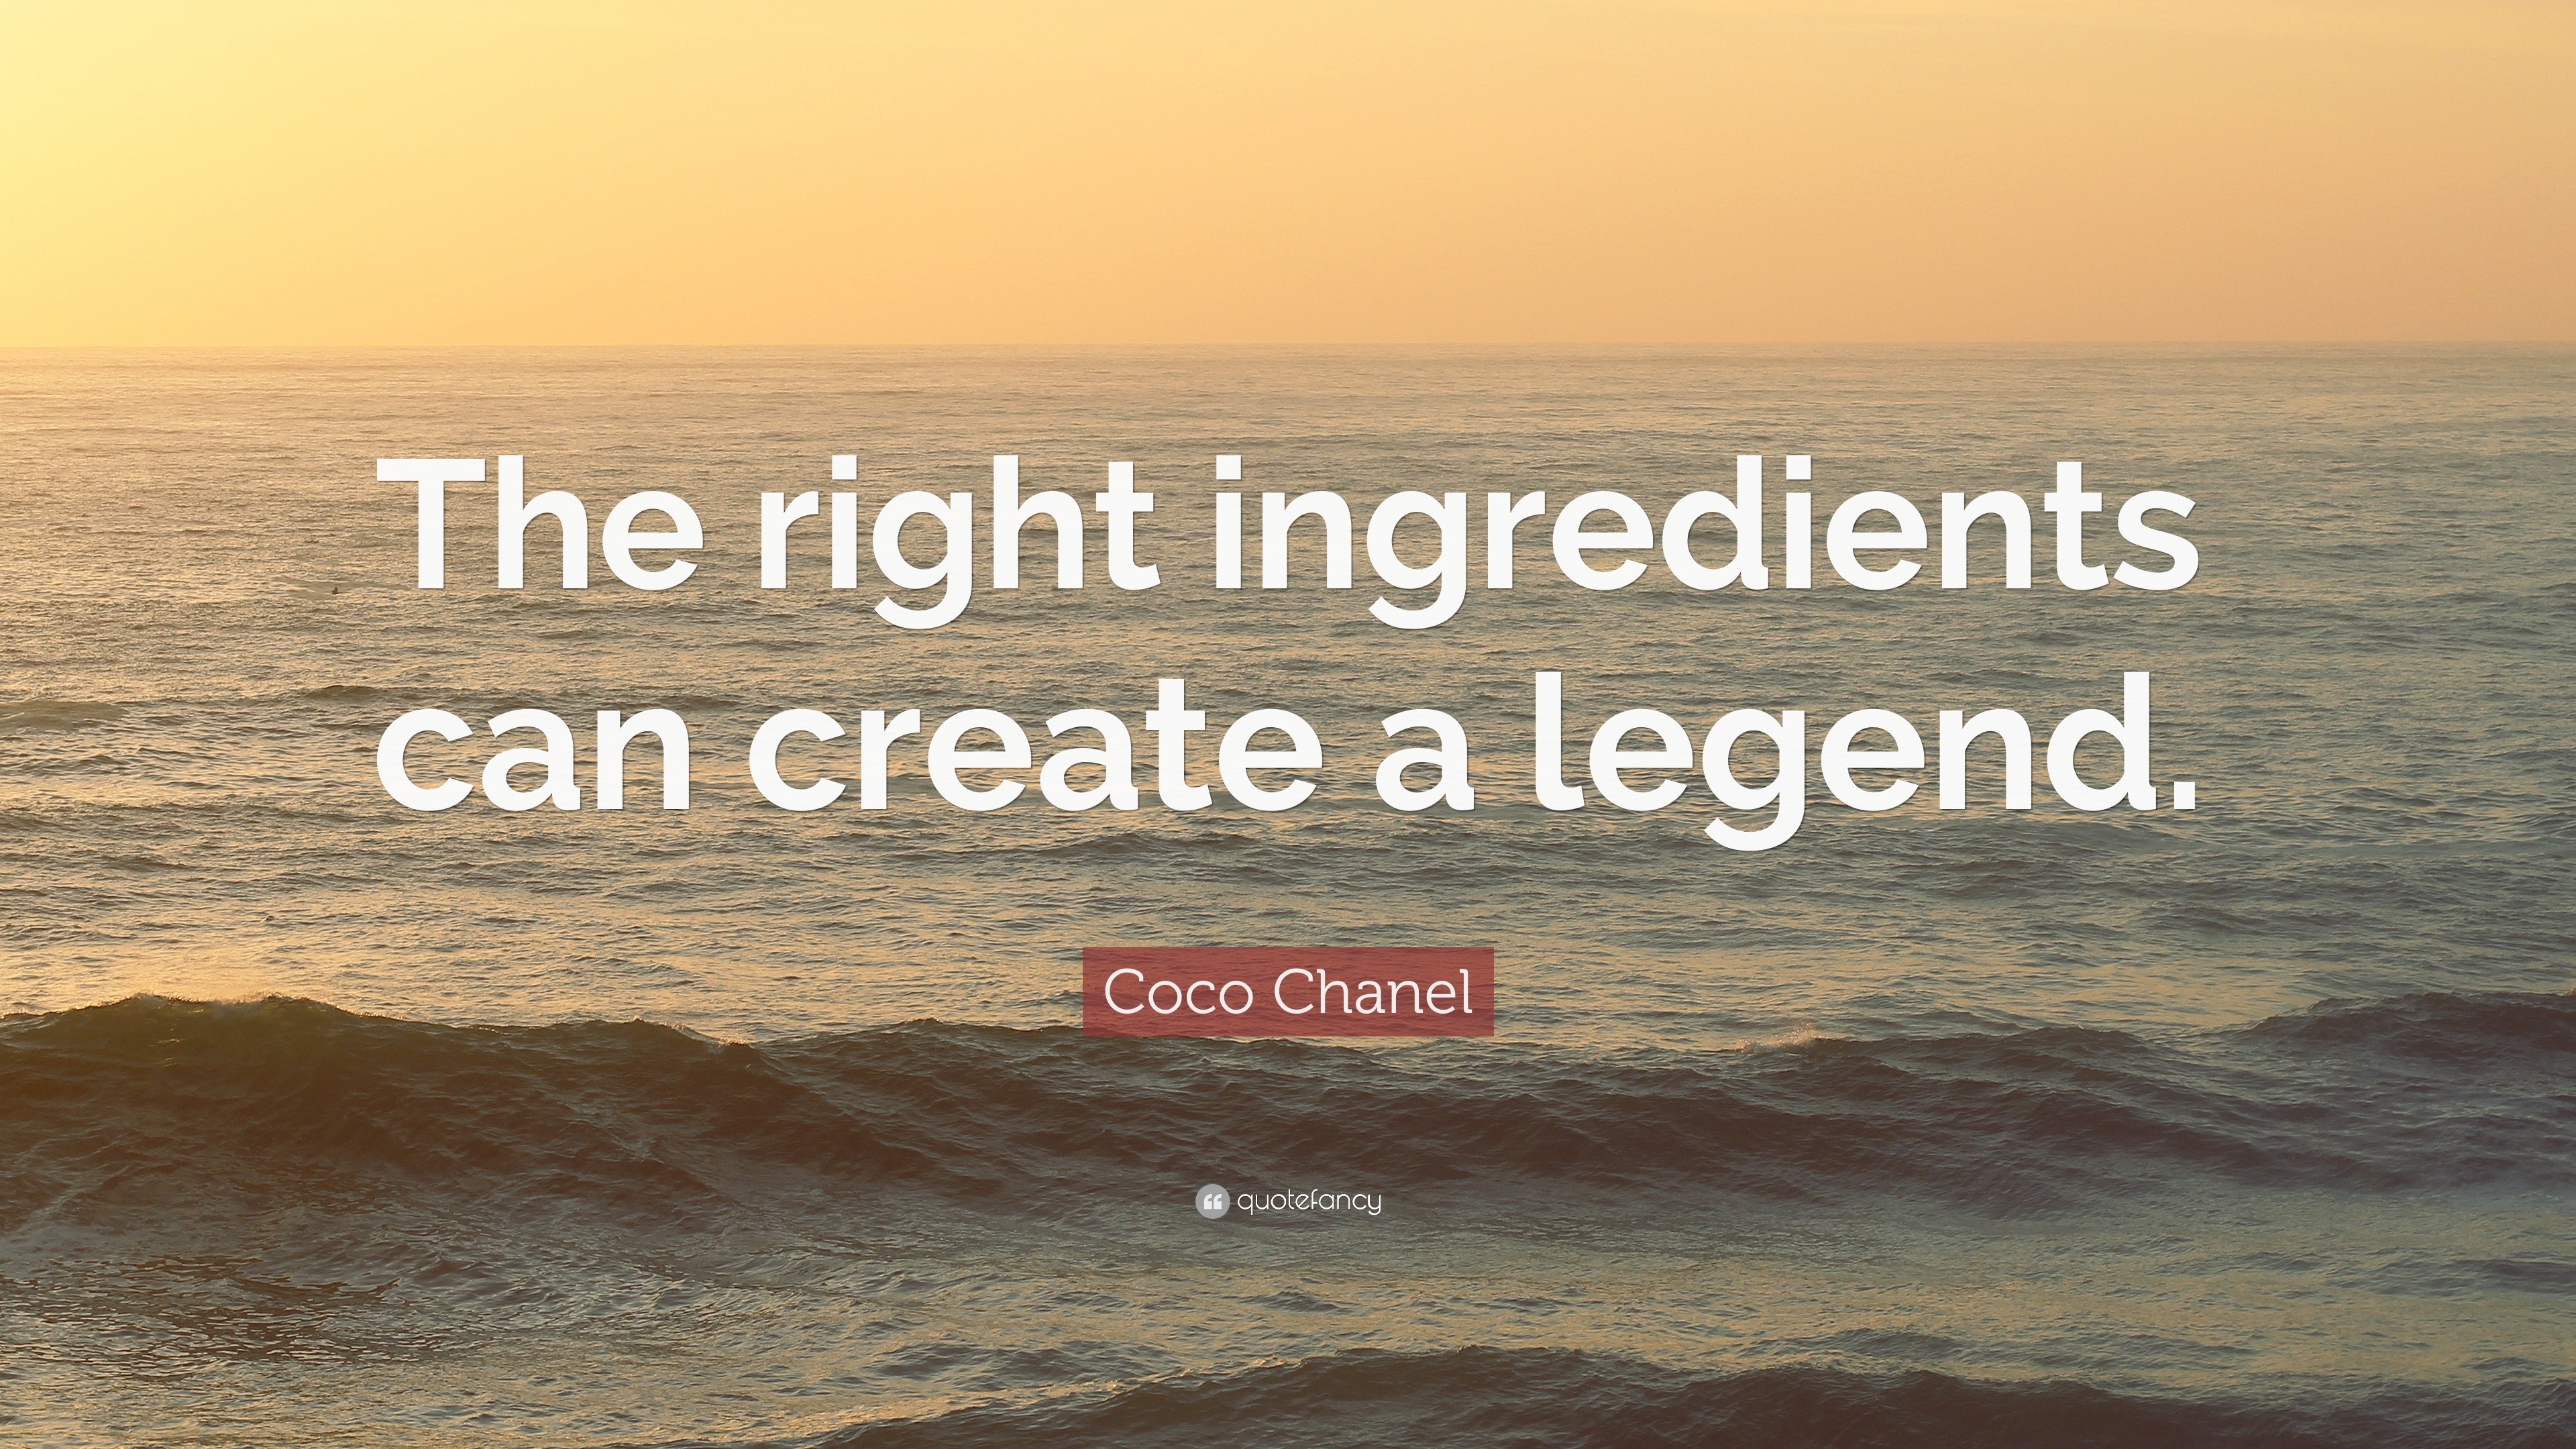 Coco Chanel Quote: "The right ingredients can create a legend." (12 wallpapers) - Quotefancy